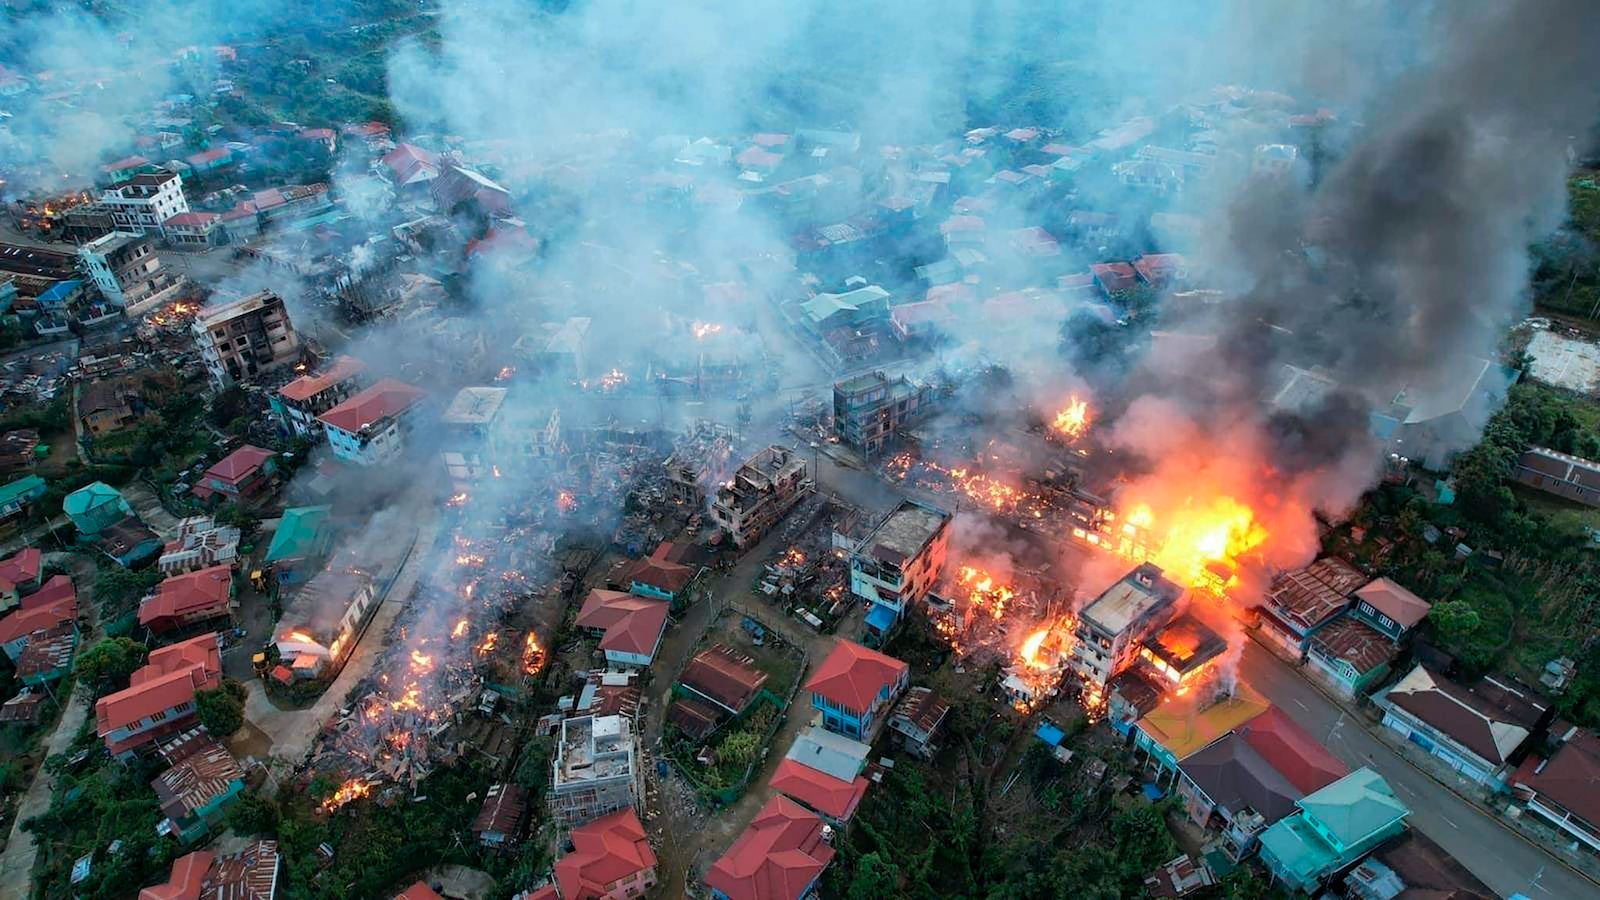 Fires burn in the town of Thantlang in Chin State, Myanmar, October 29, 2021.